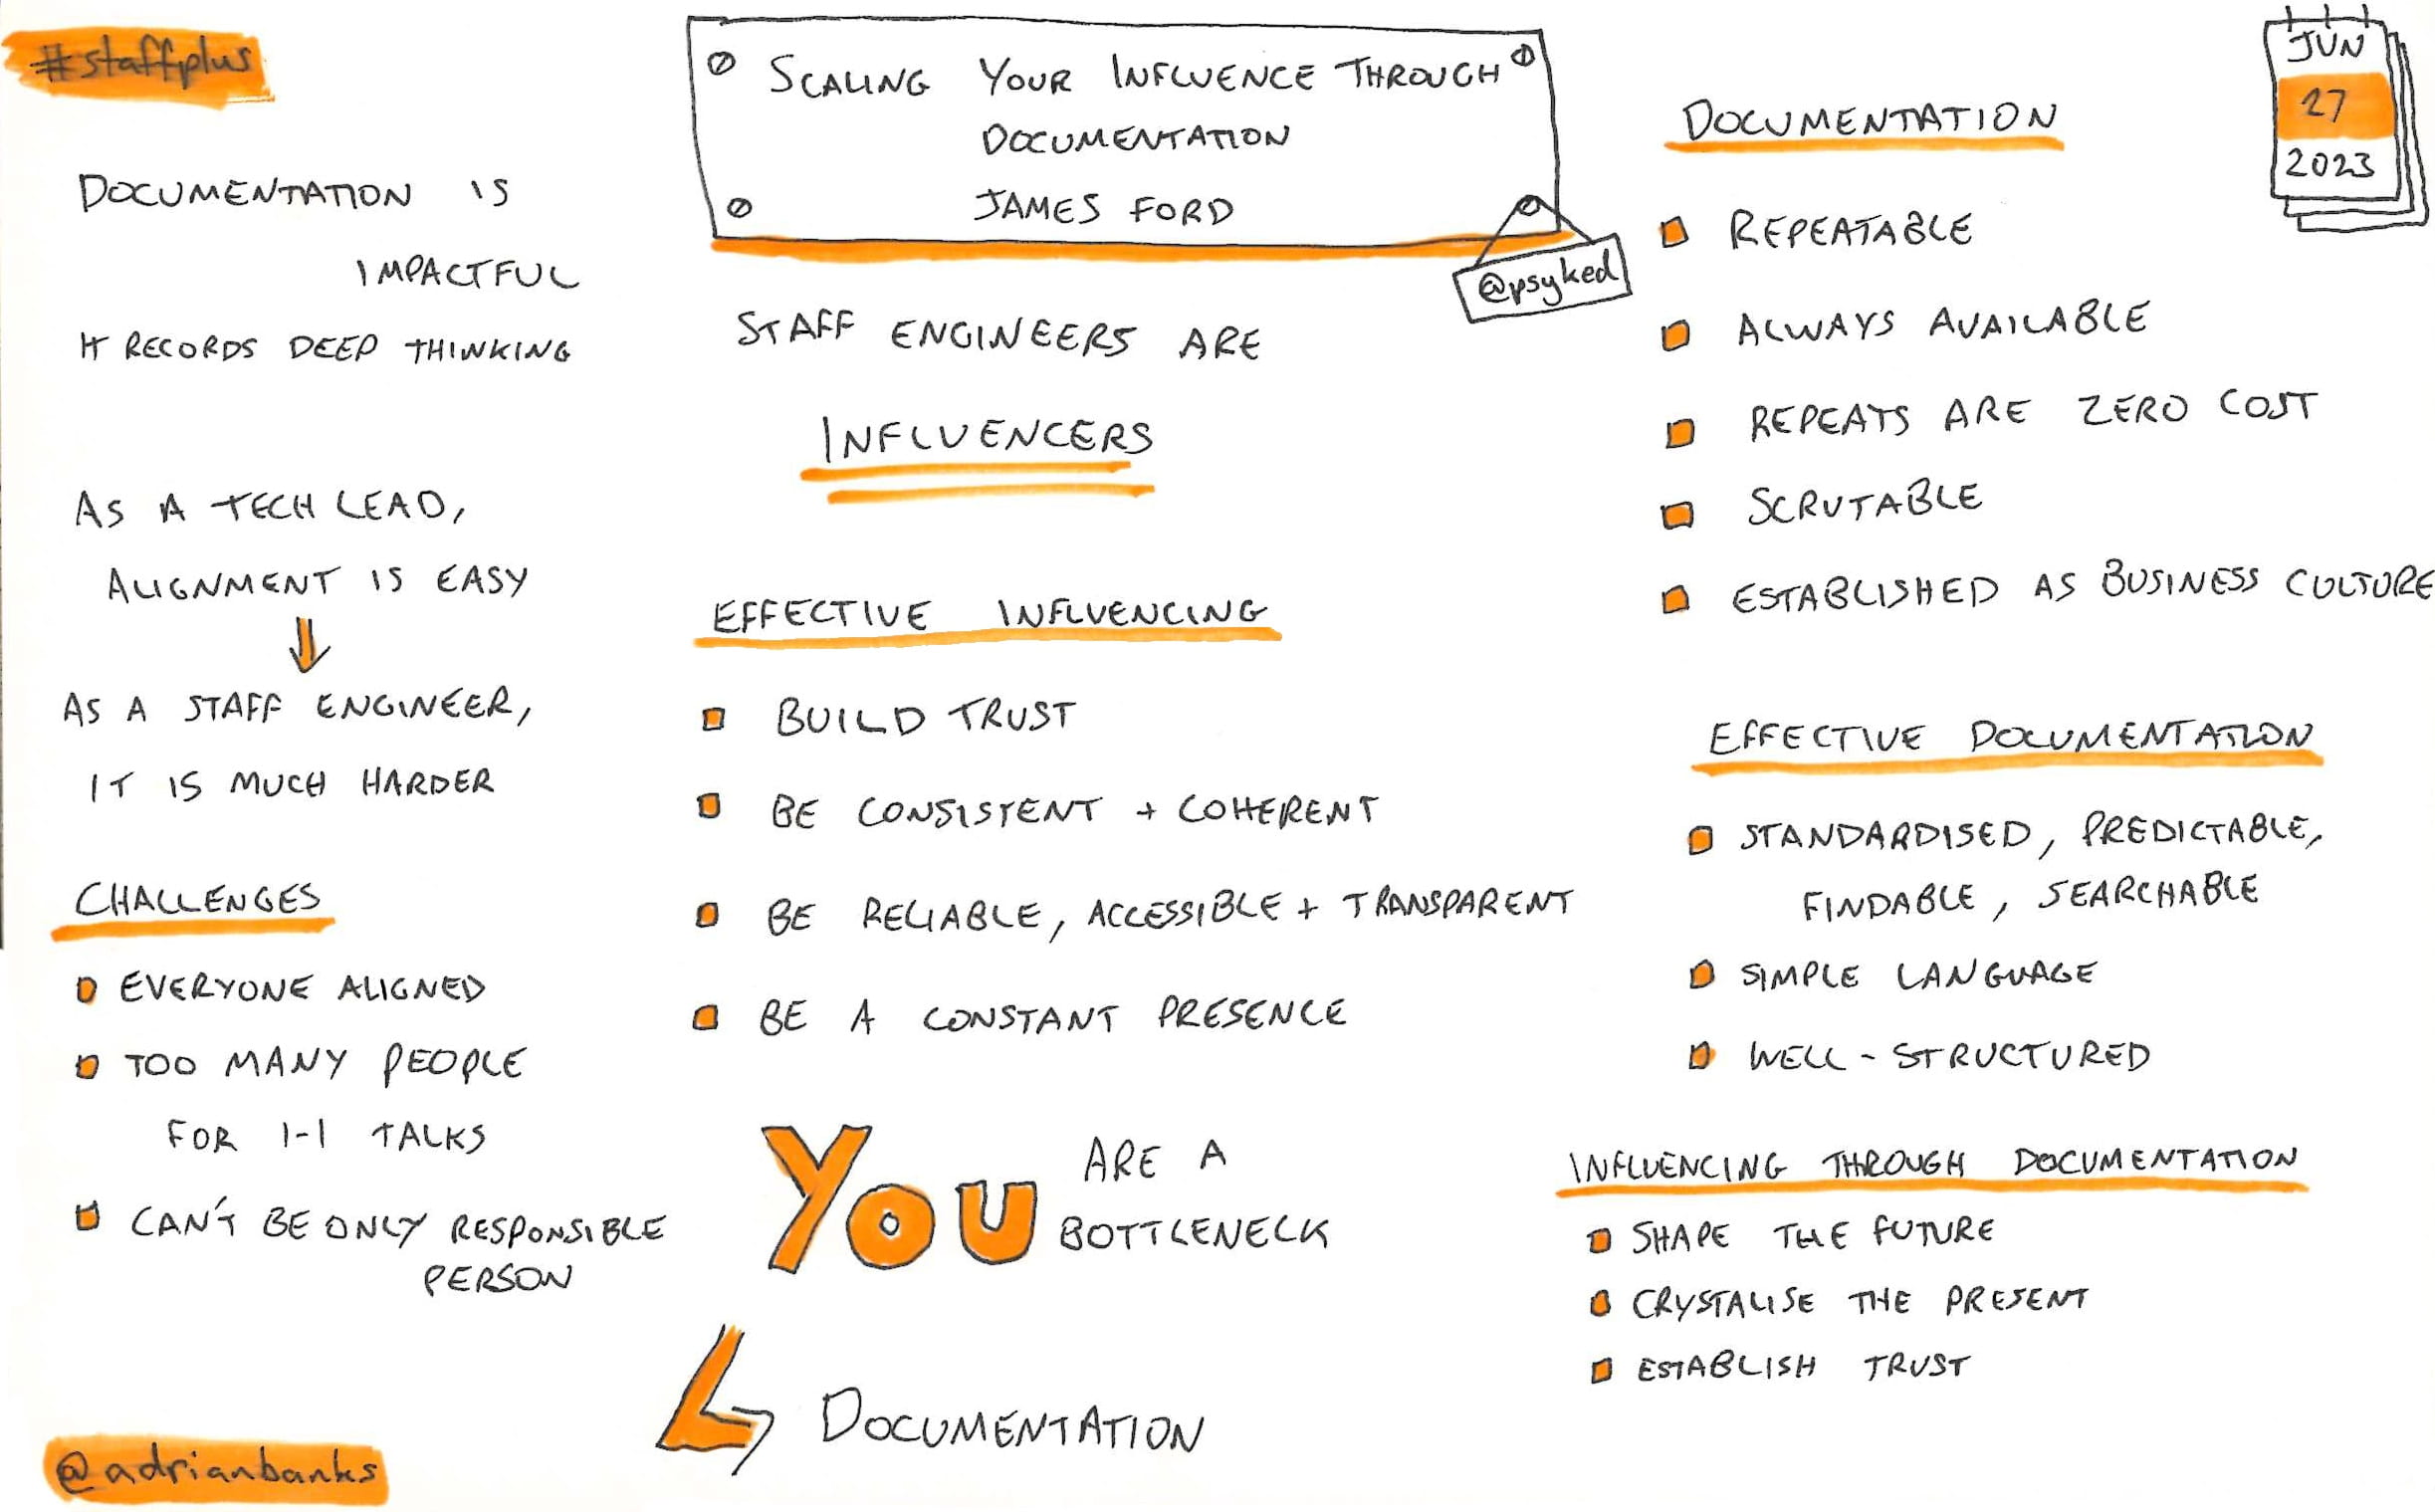 Scaling Your Influence Through Documentation by James Ford